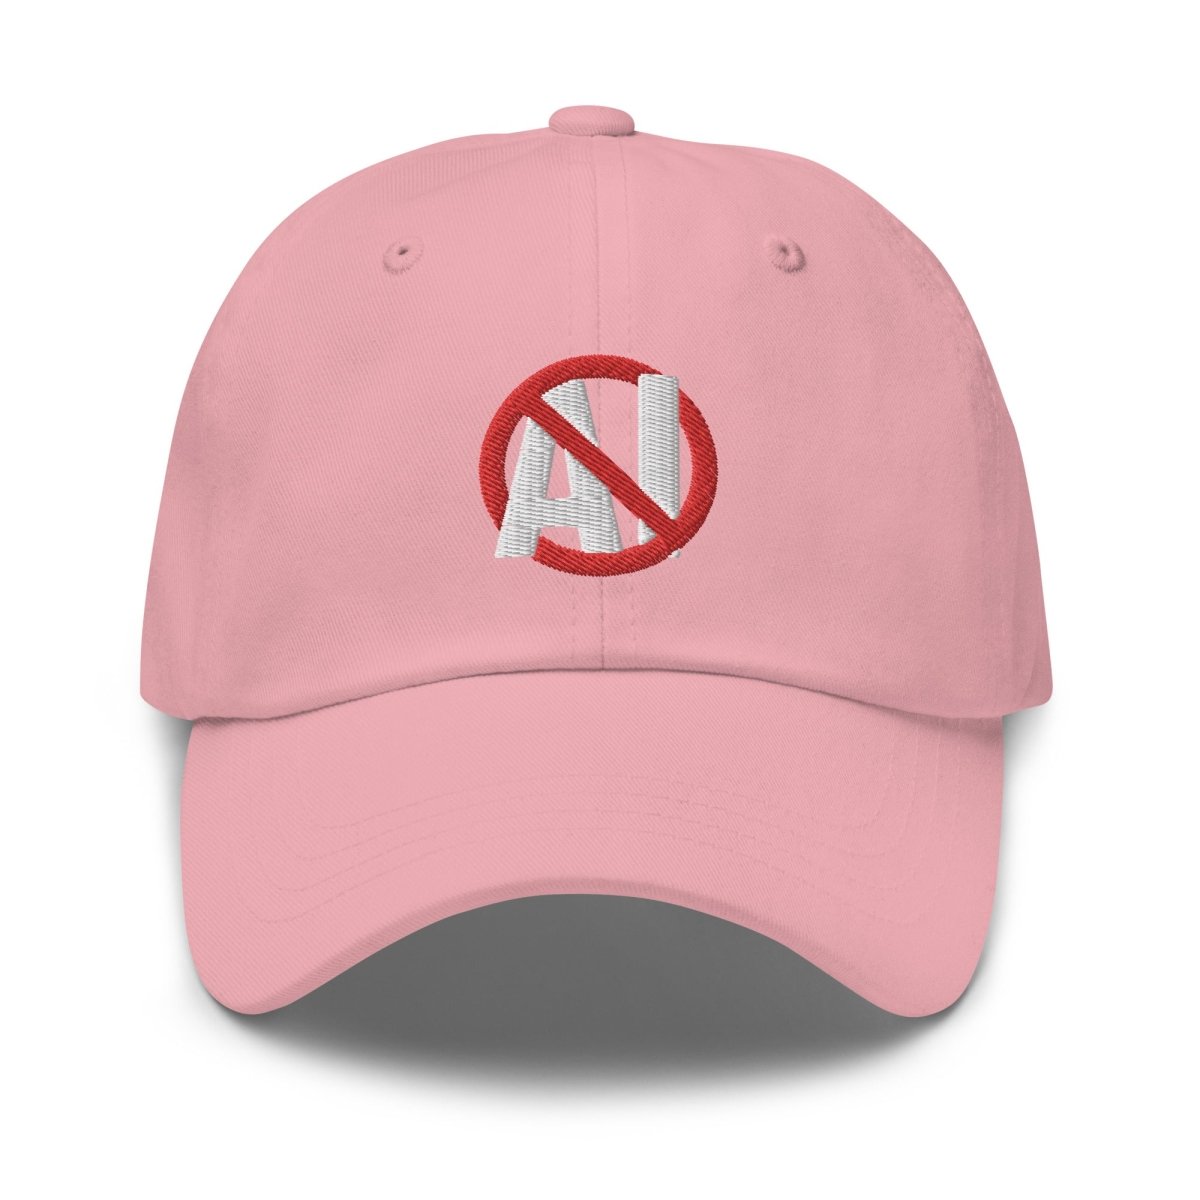 Stop AI Embroidered Cap - Pink - AI Store